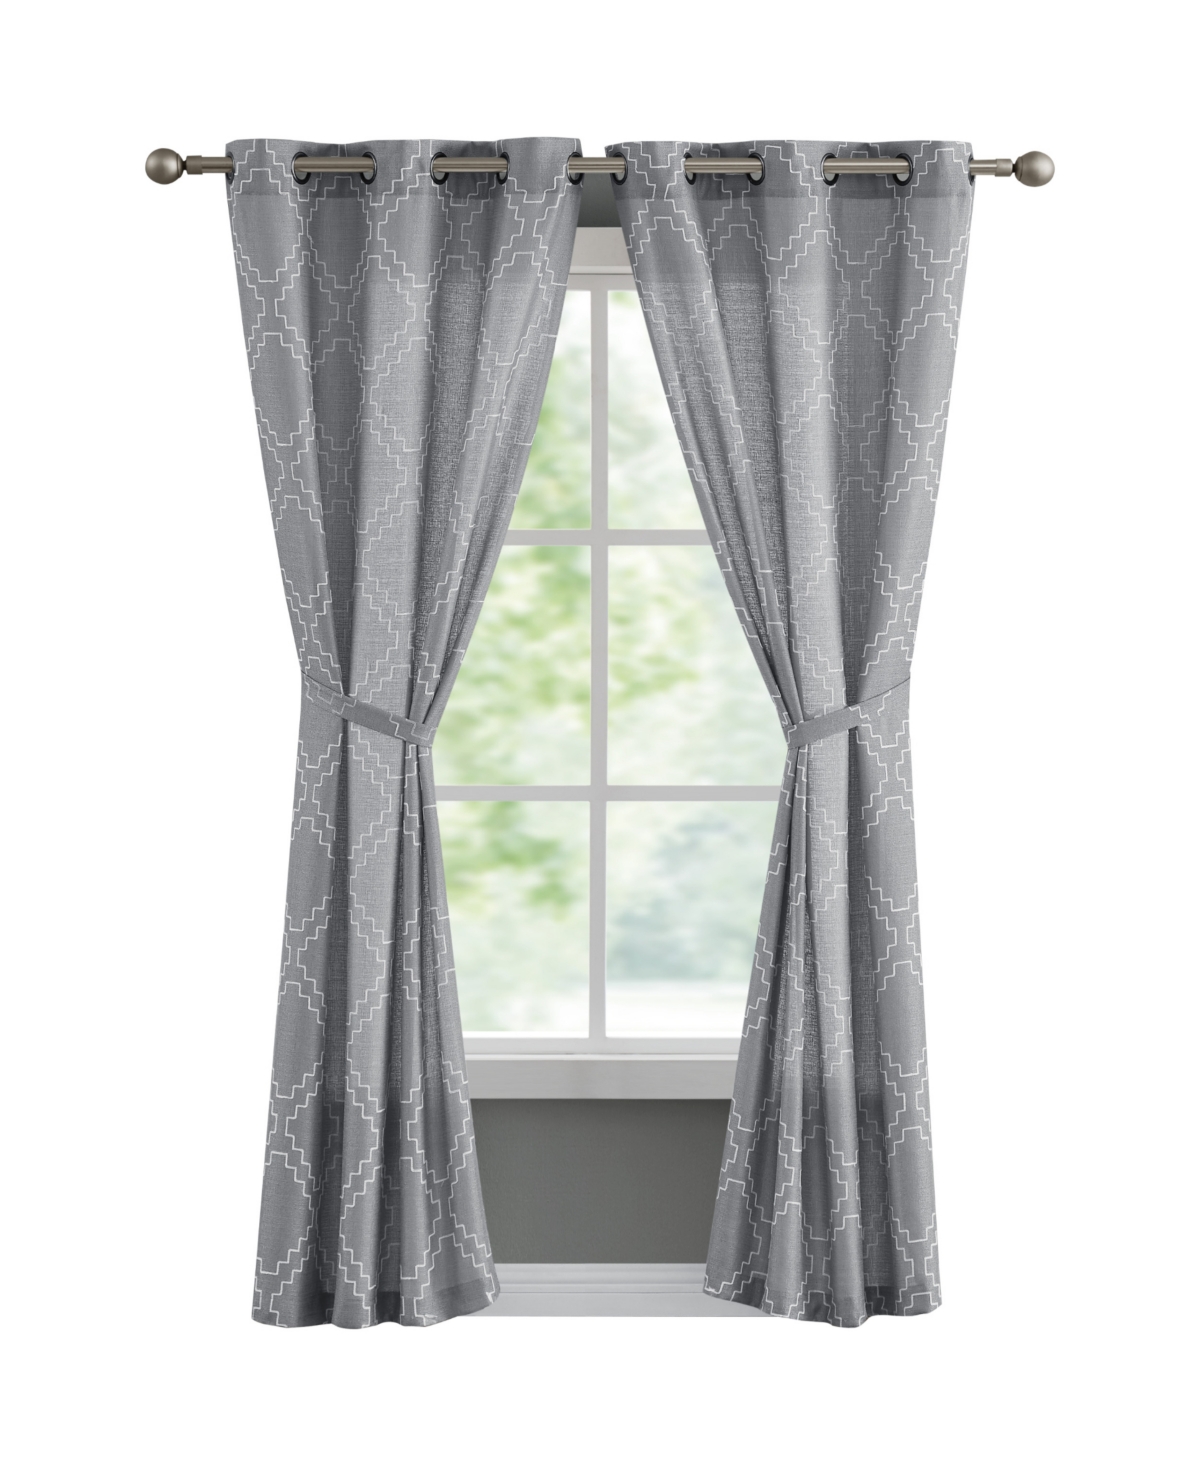 French Connection Somerset Embroidered Light Filtering Grommet Window Curtain Panel Pair With Tiebacks, 38" X 84" In Gray